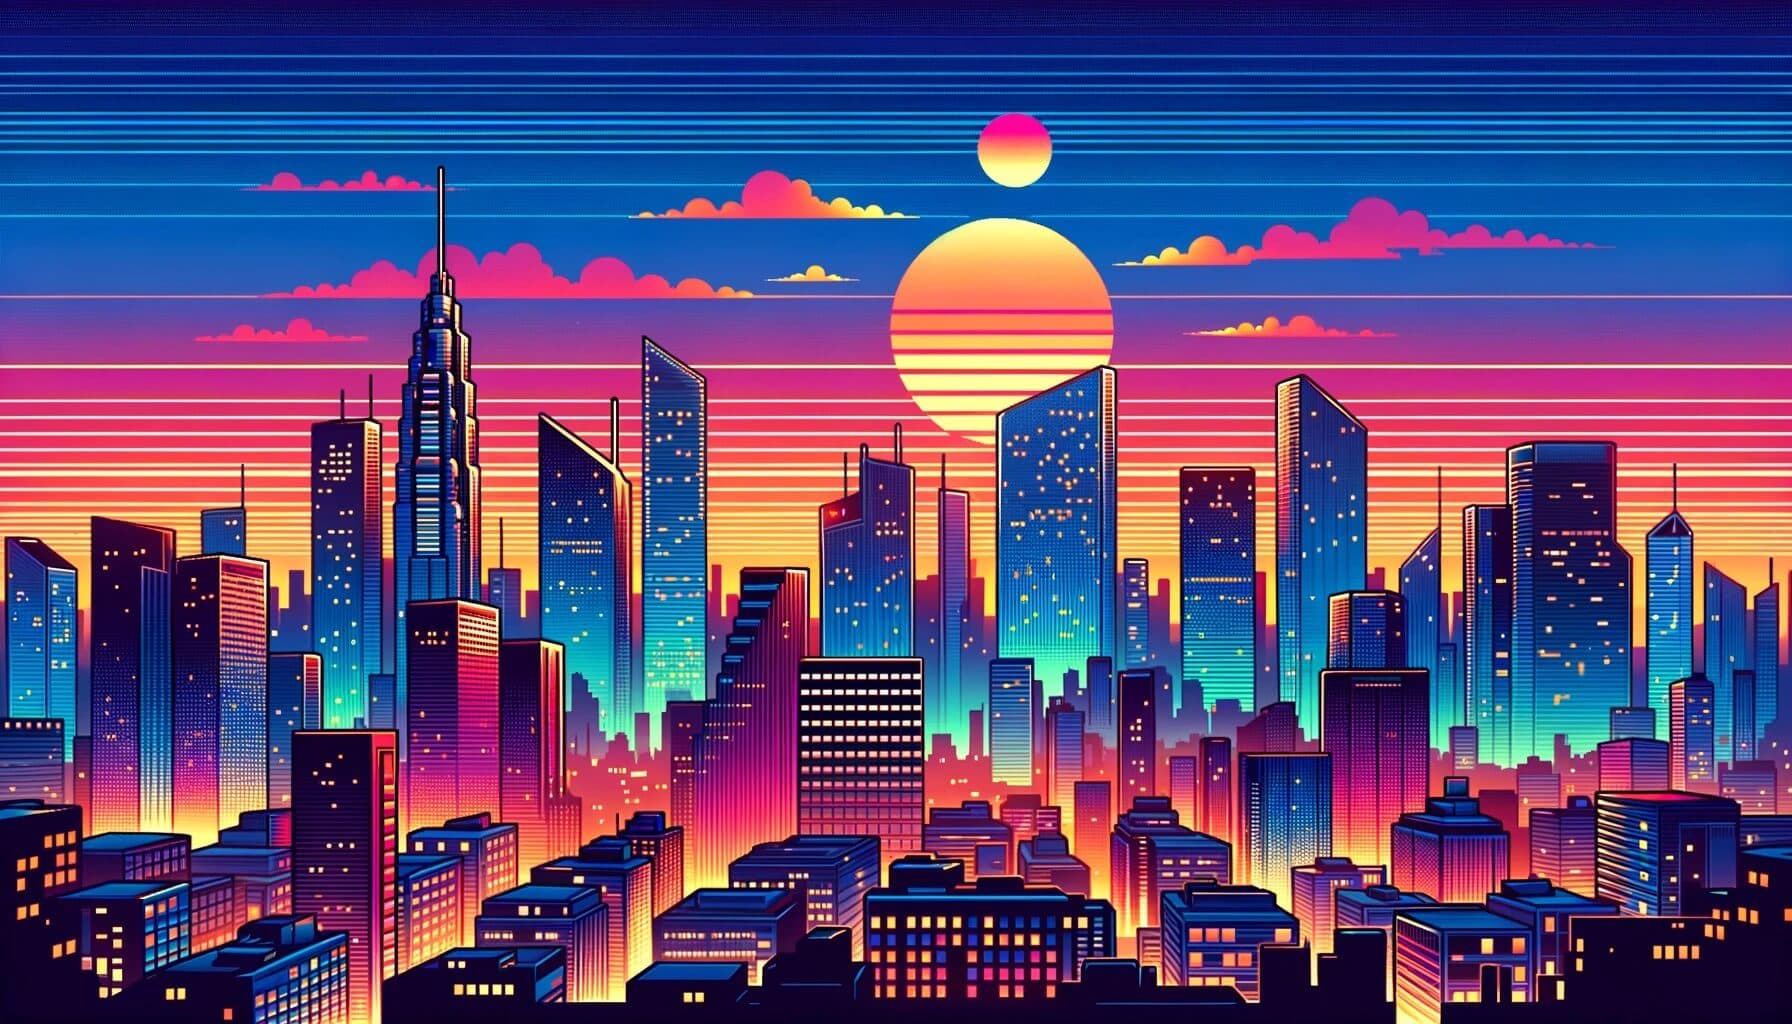 An artistic rendering of digital currencies gaining global adoption, portrayed as a vibrant neon cityscape representing the potential for the BRICS digital currency to integrate with major economic centers, used to illustrate the section on digital currencies being the future of financial systems.